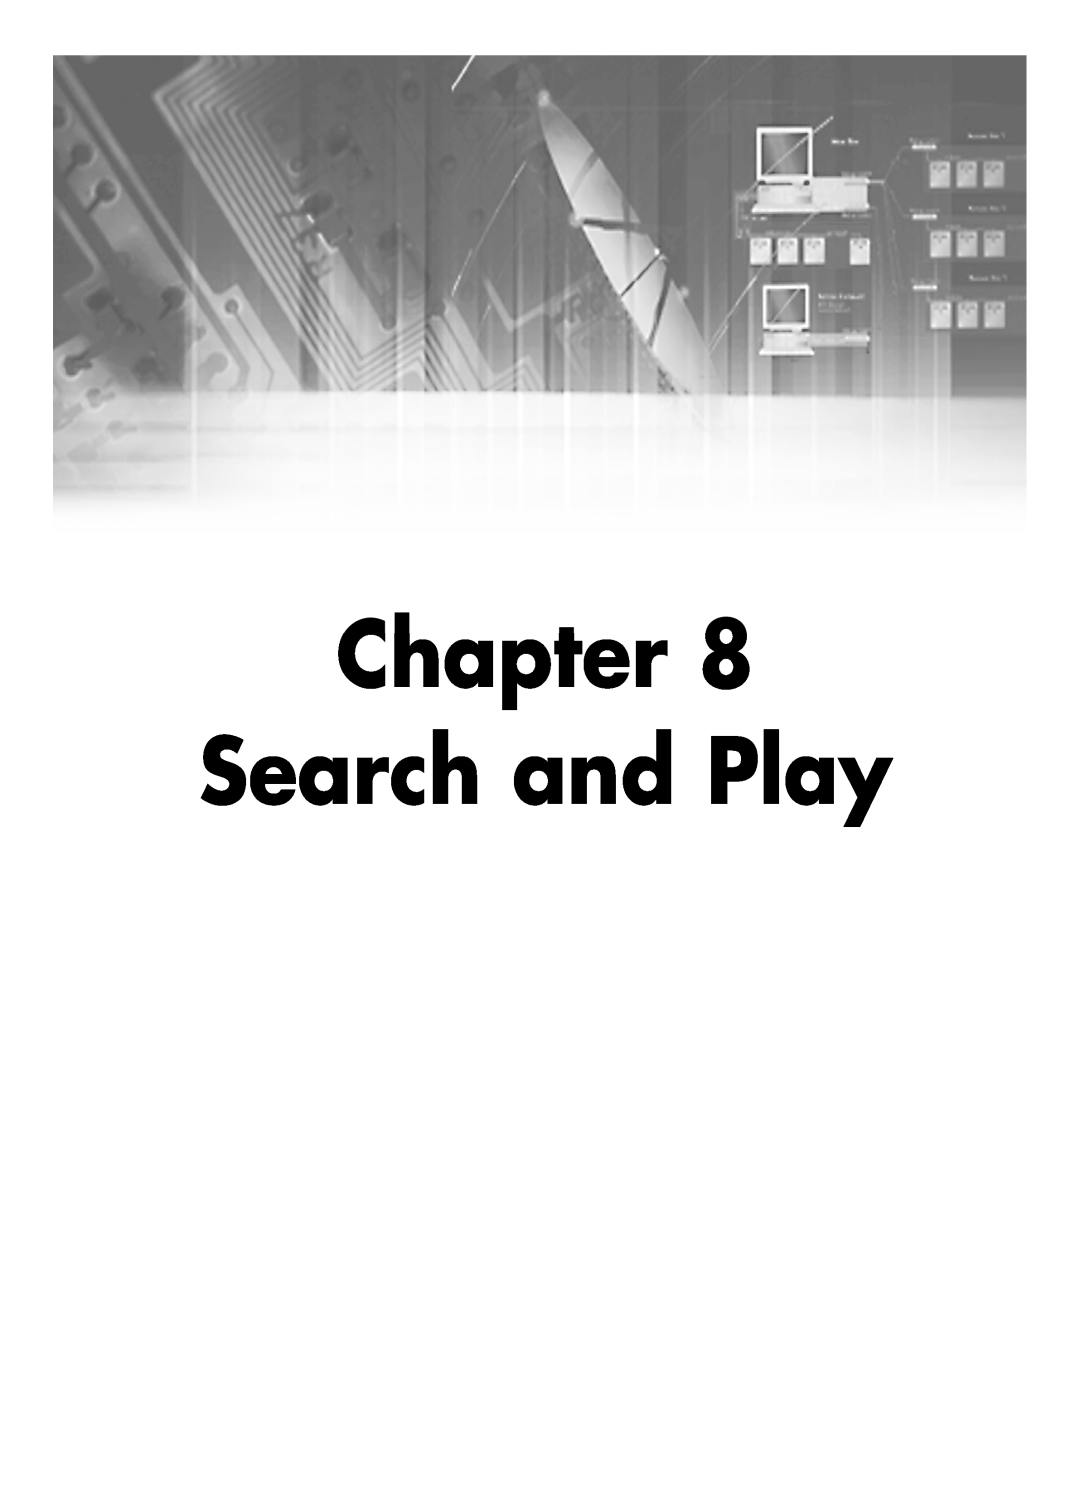 Samsung SHR-2040P250, SHR-2042P250 manual Chapter Search and Play 